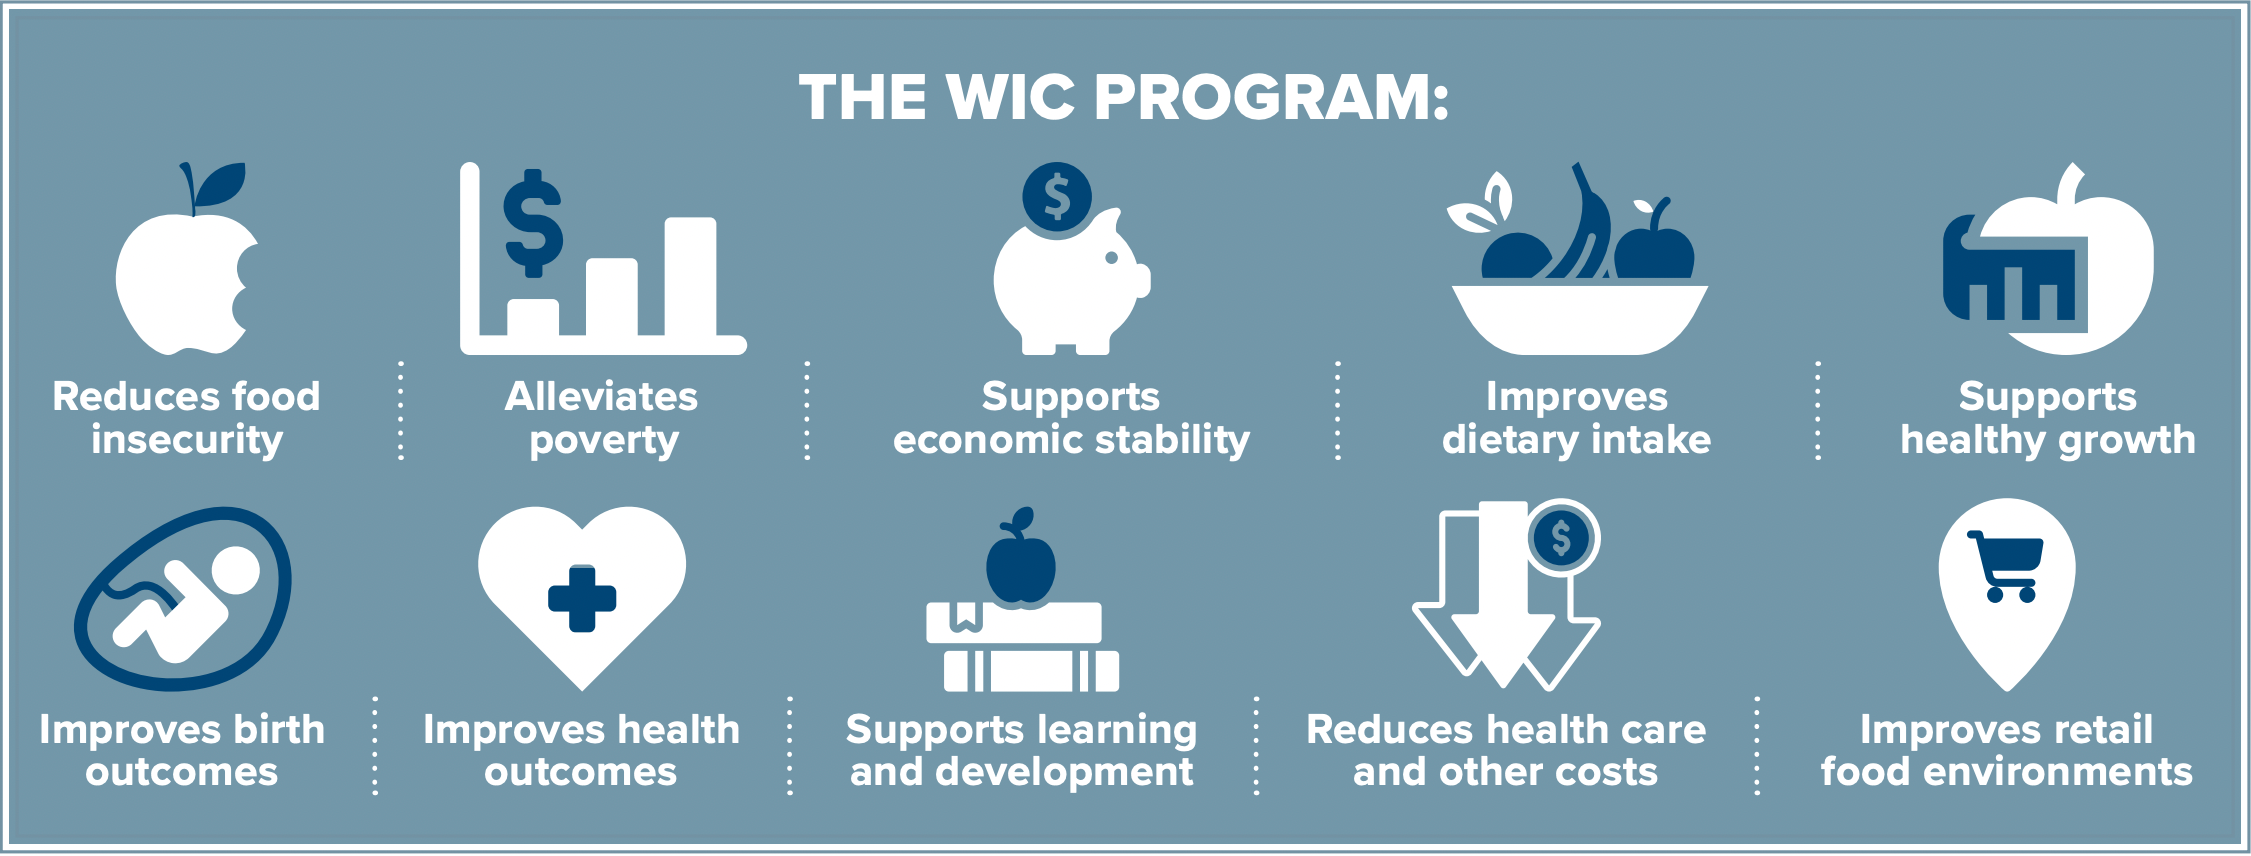 Graphic illustrating benefits of the WIC program, including reduced food insecurity and supporting economic stability